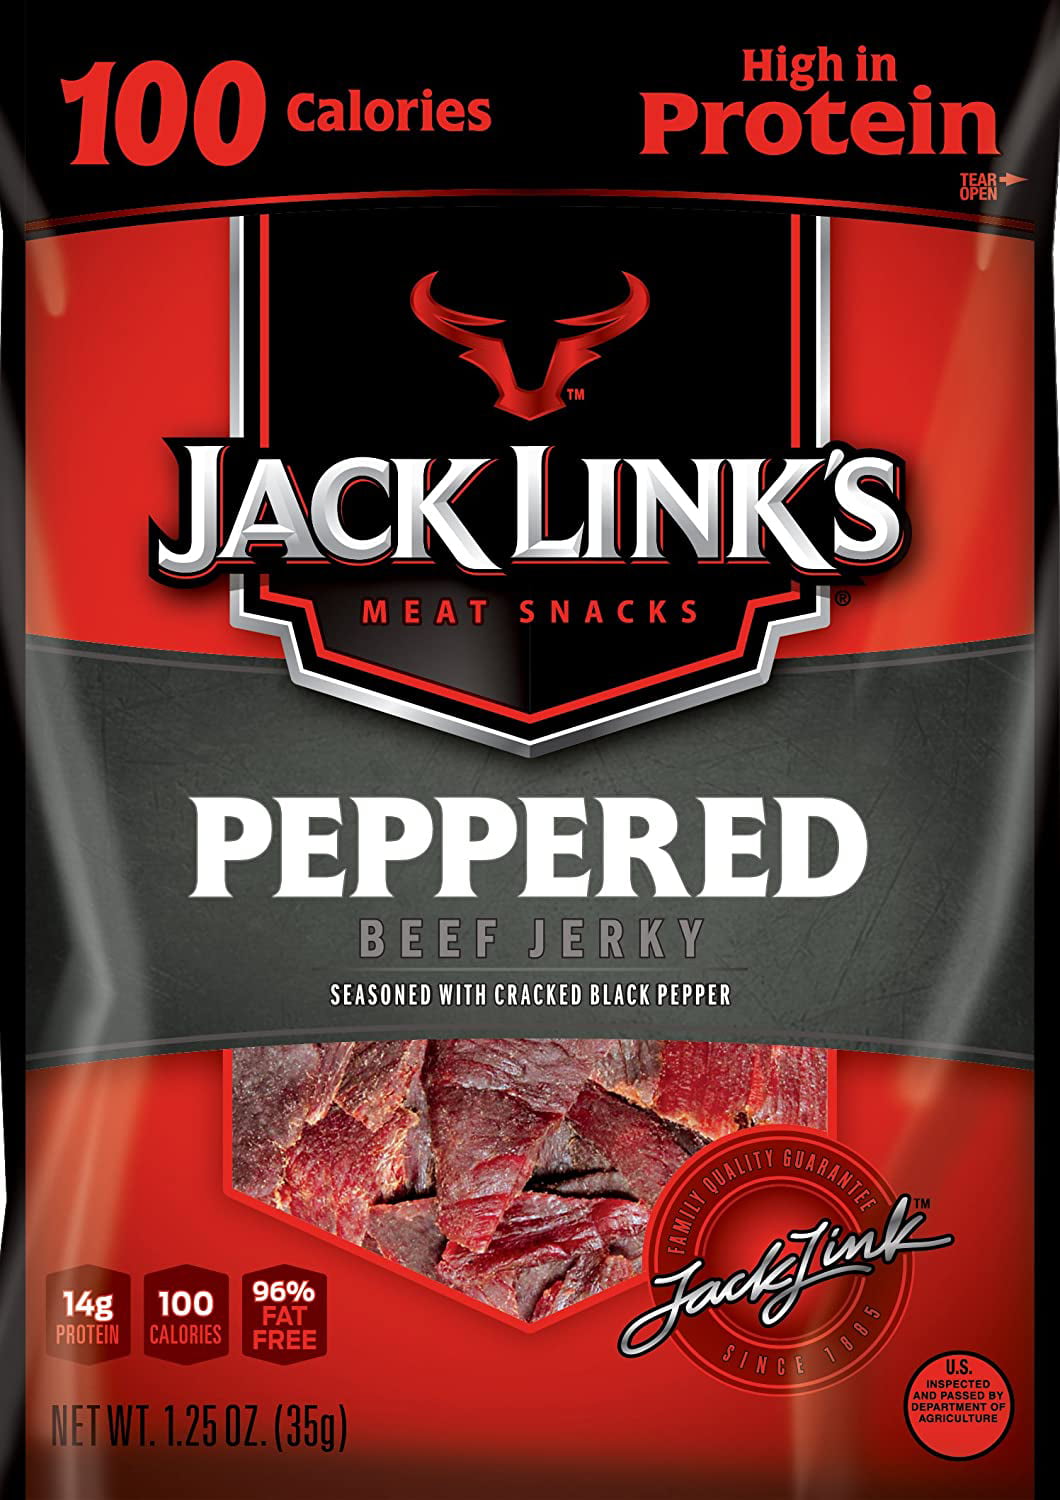 An intro to Beef Jerky